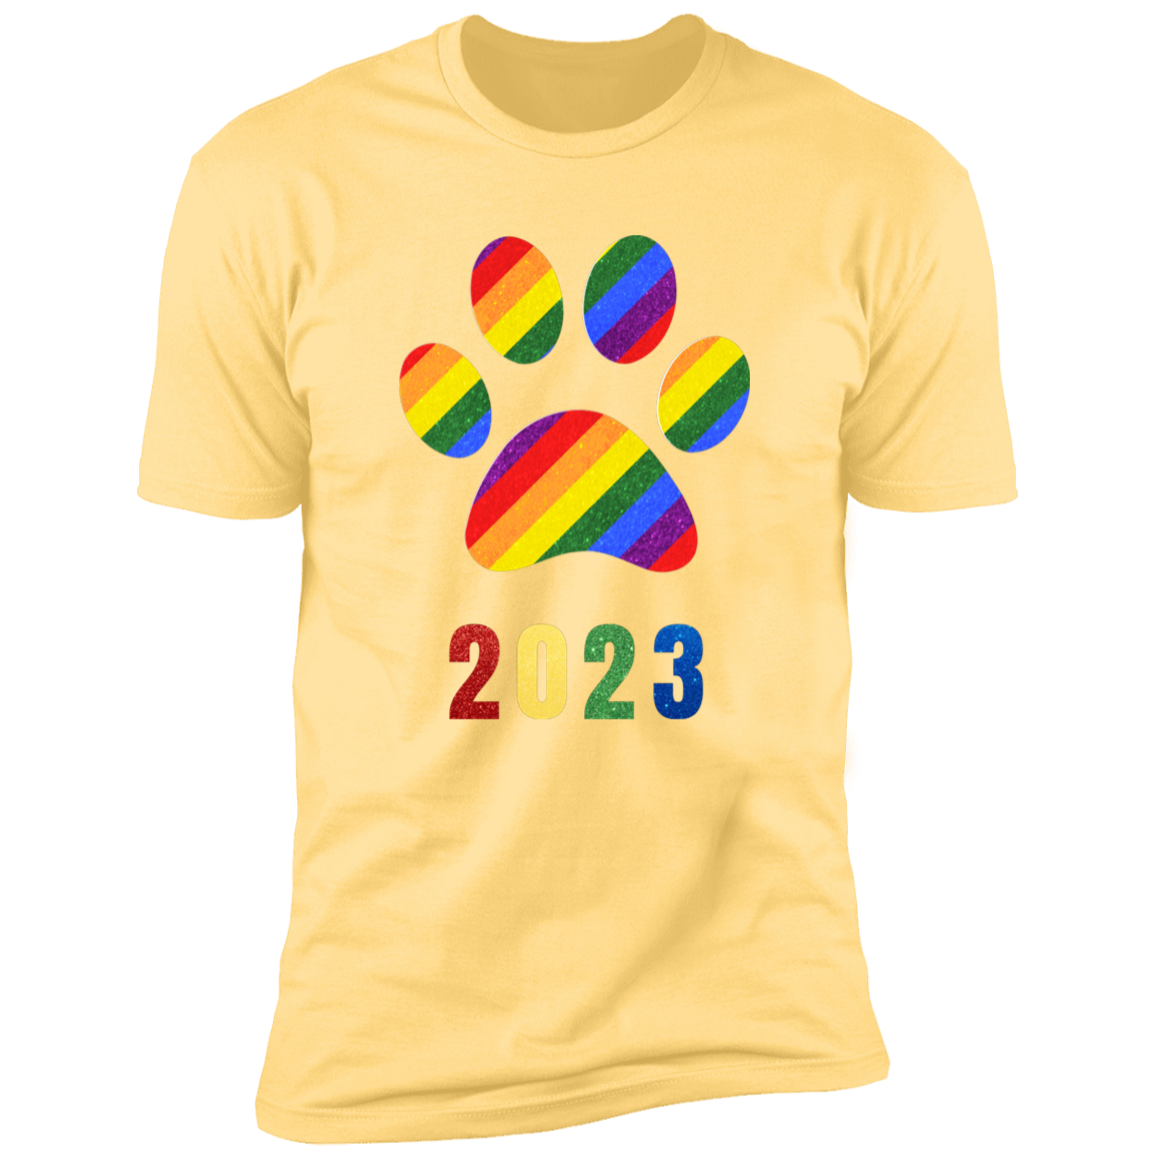 Pride Paw 2023 (Sparkles) Pride T-shirt, Paw Pride Dog Shirt for humans, in banana cream